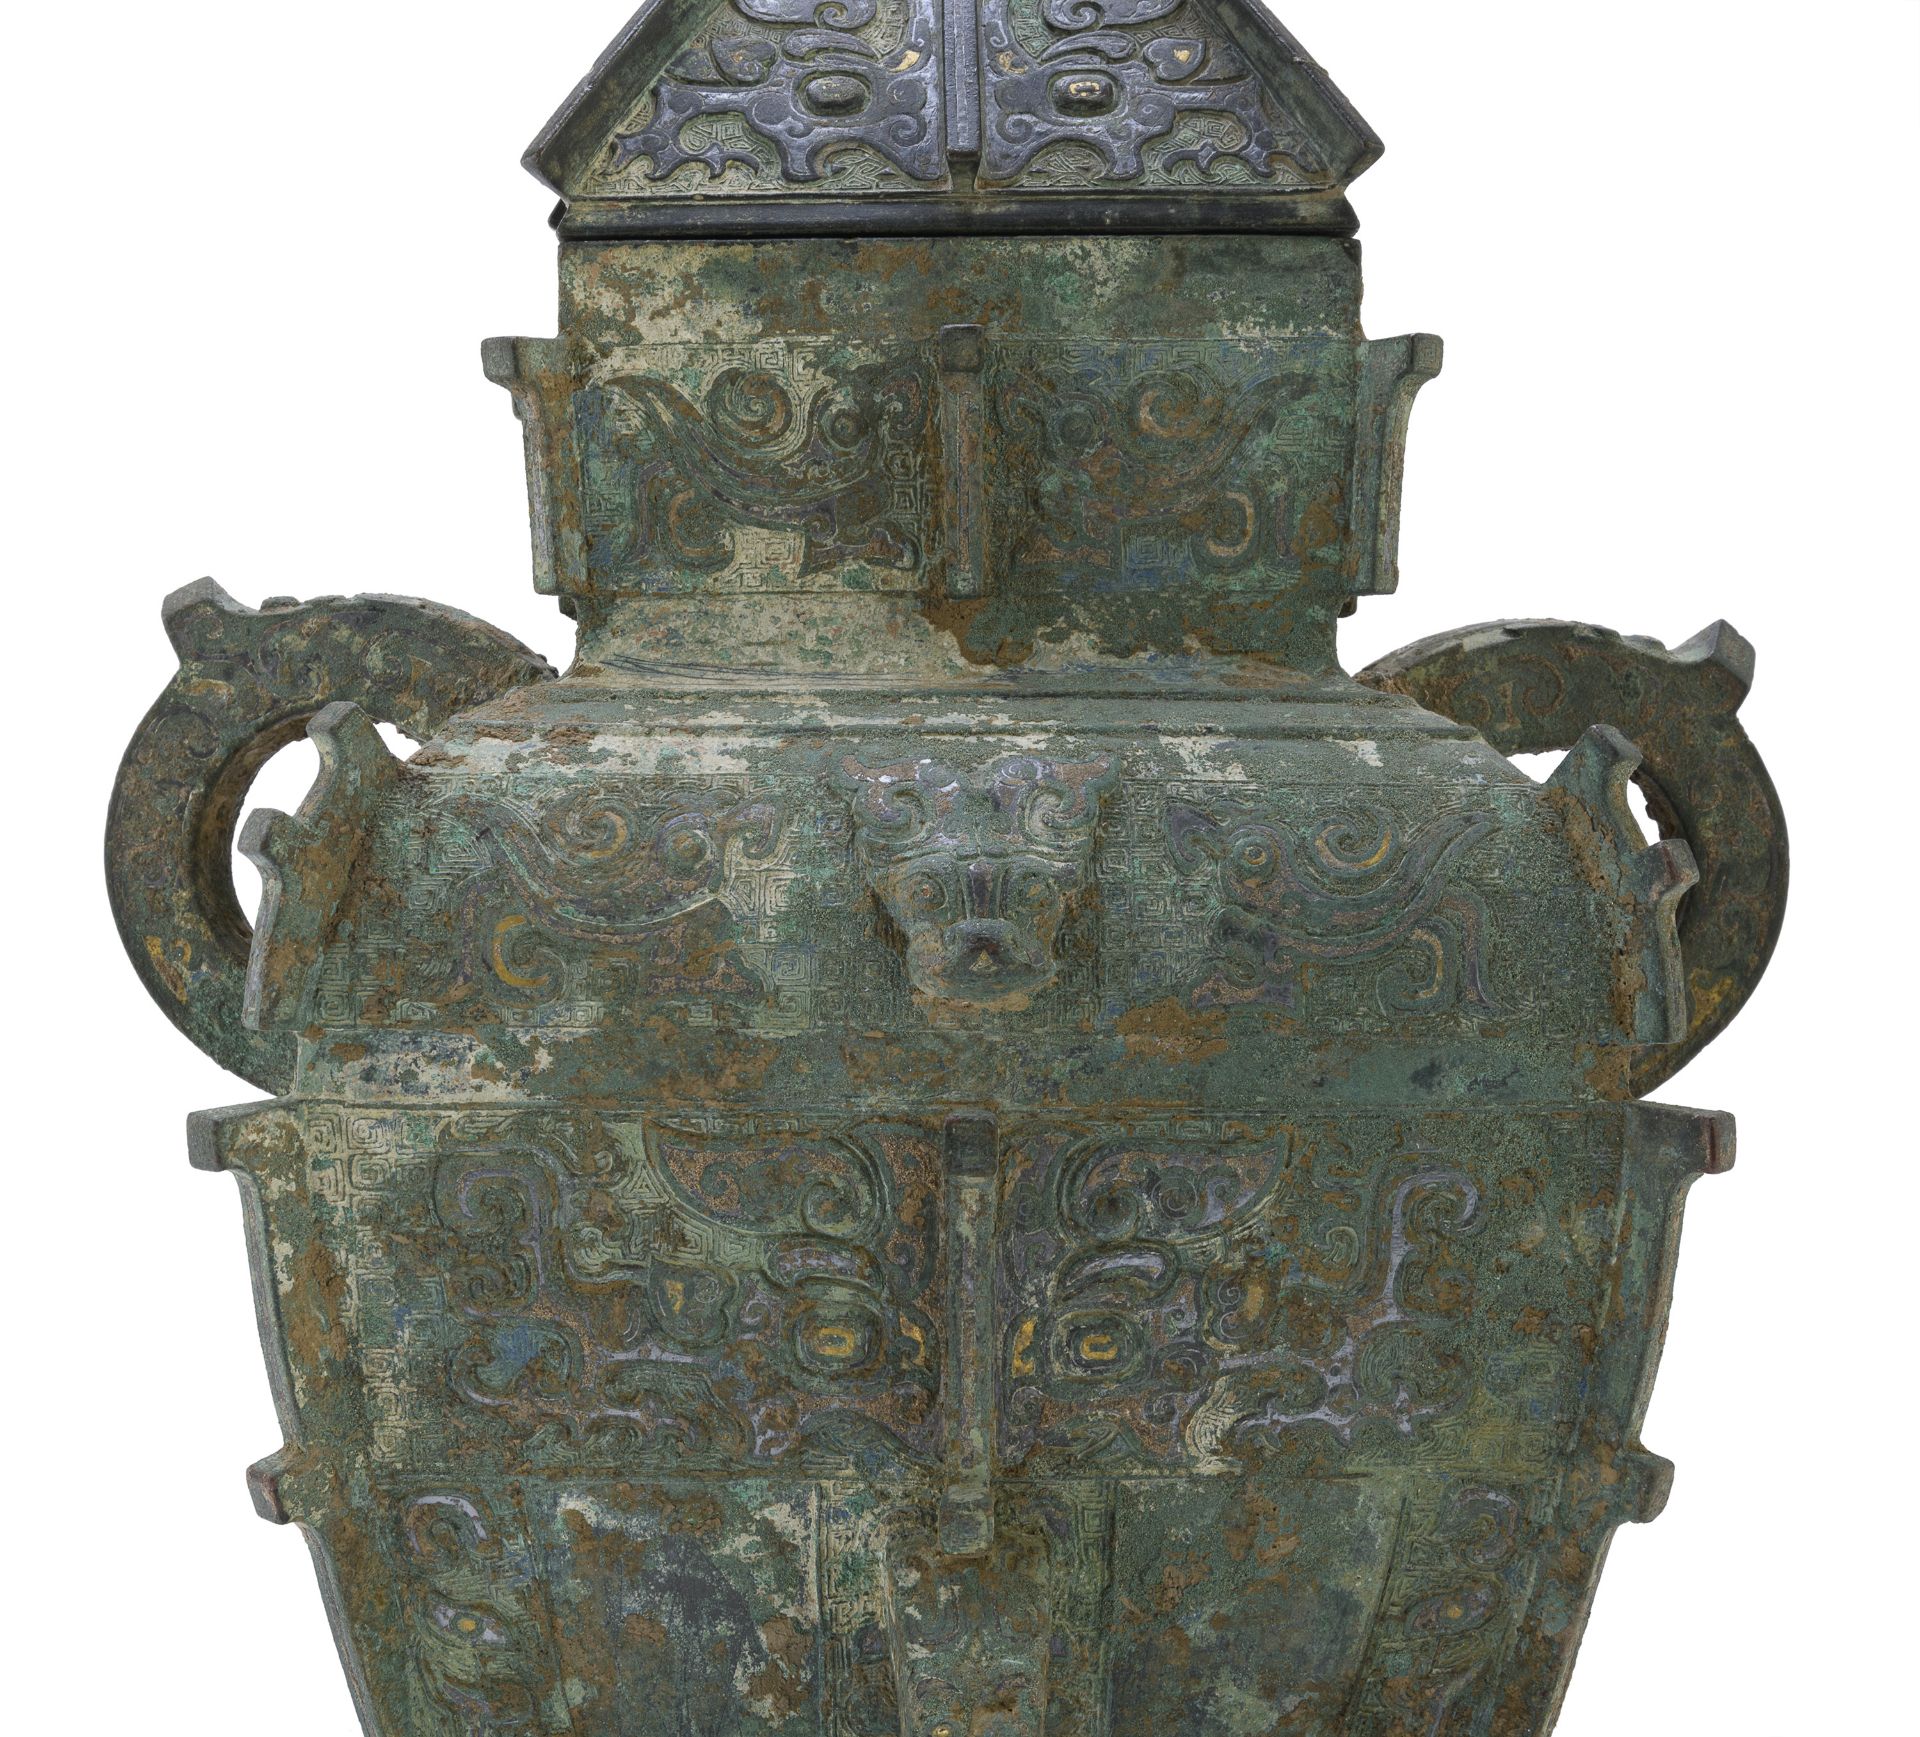 A VERY RARE AND IMPORTANT BRONZE RITUAL WINE VESSEL CHINA 13TH-14TH CENTURY - Image 4 of 7